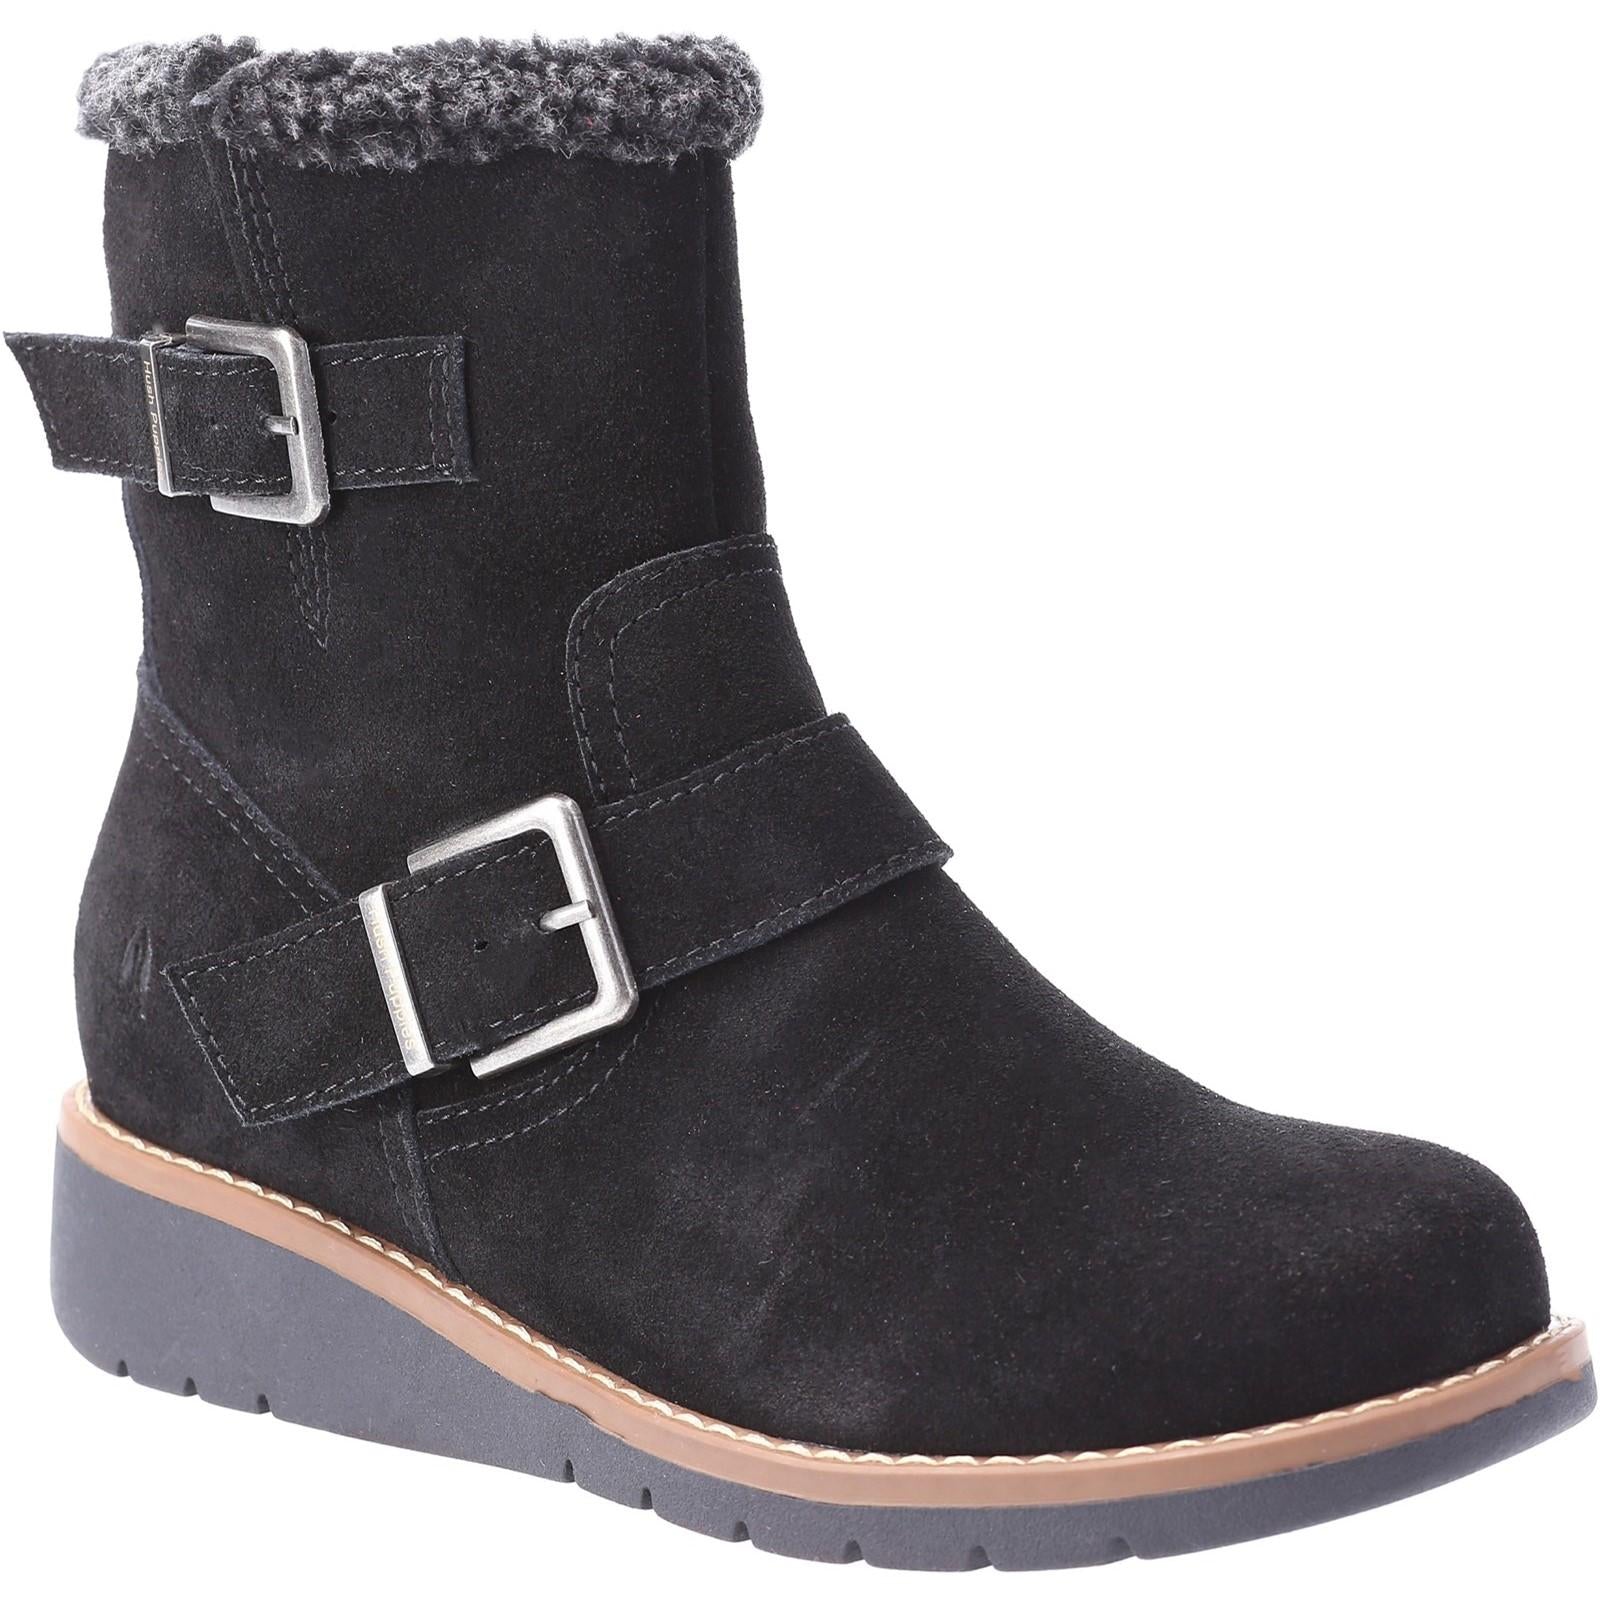 Hush Puppies Lexie Boot